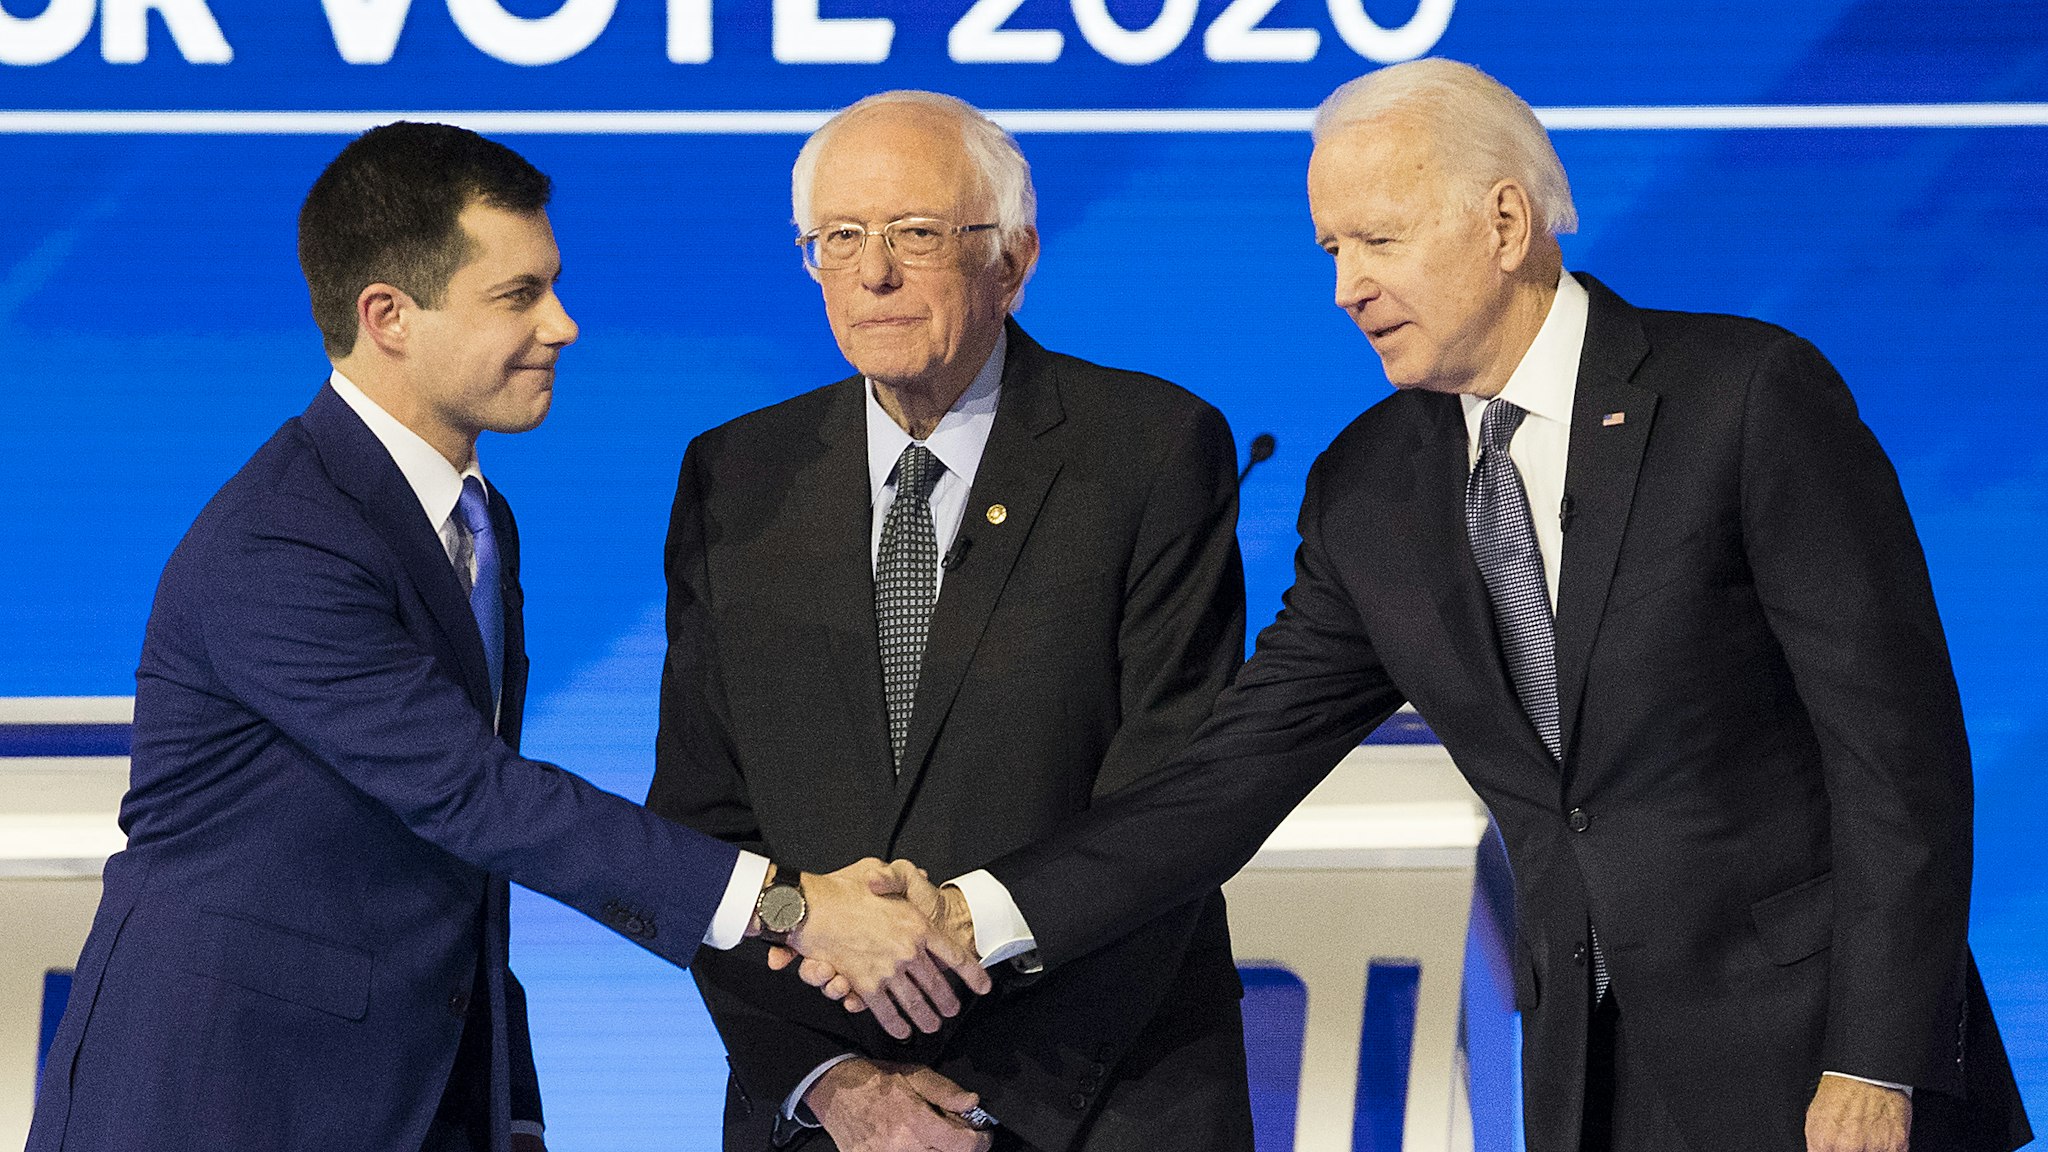 Pete Buttigieg, former mayor of South Bend and 2020 presidential candidate, left, shakes hands with Former Vice President Joe Biden, as Senator Bernie Sanders, an Independent from Vermont, stands on stage ahead of the Democratic presidential debate at Saint Anselm College in Manchester, New Hampshire, U.S., on Friday, Feb. 7, 2020. The New Hampshire debates often mark a turning point in a presidential campaign, as the field of candidates is winnowed and voters begin to pay closer attention.